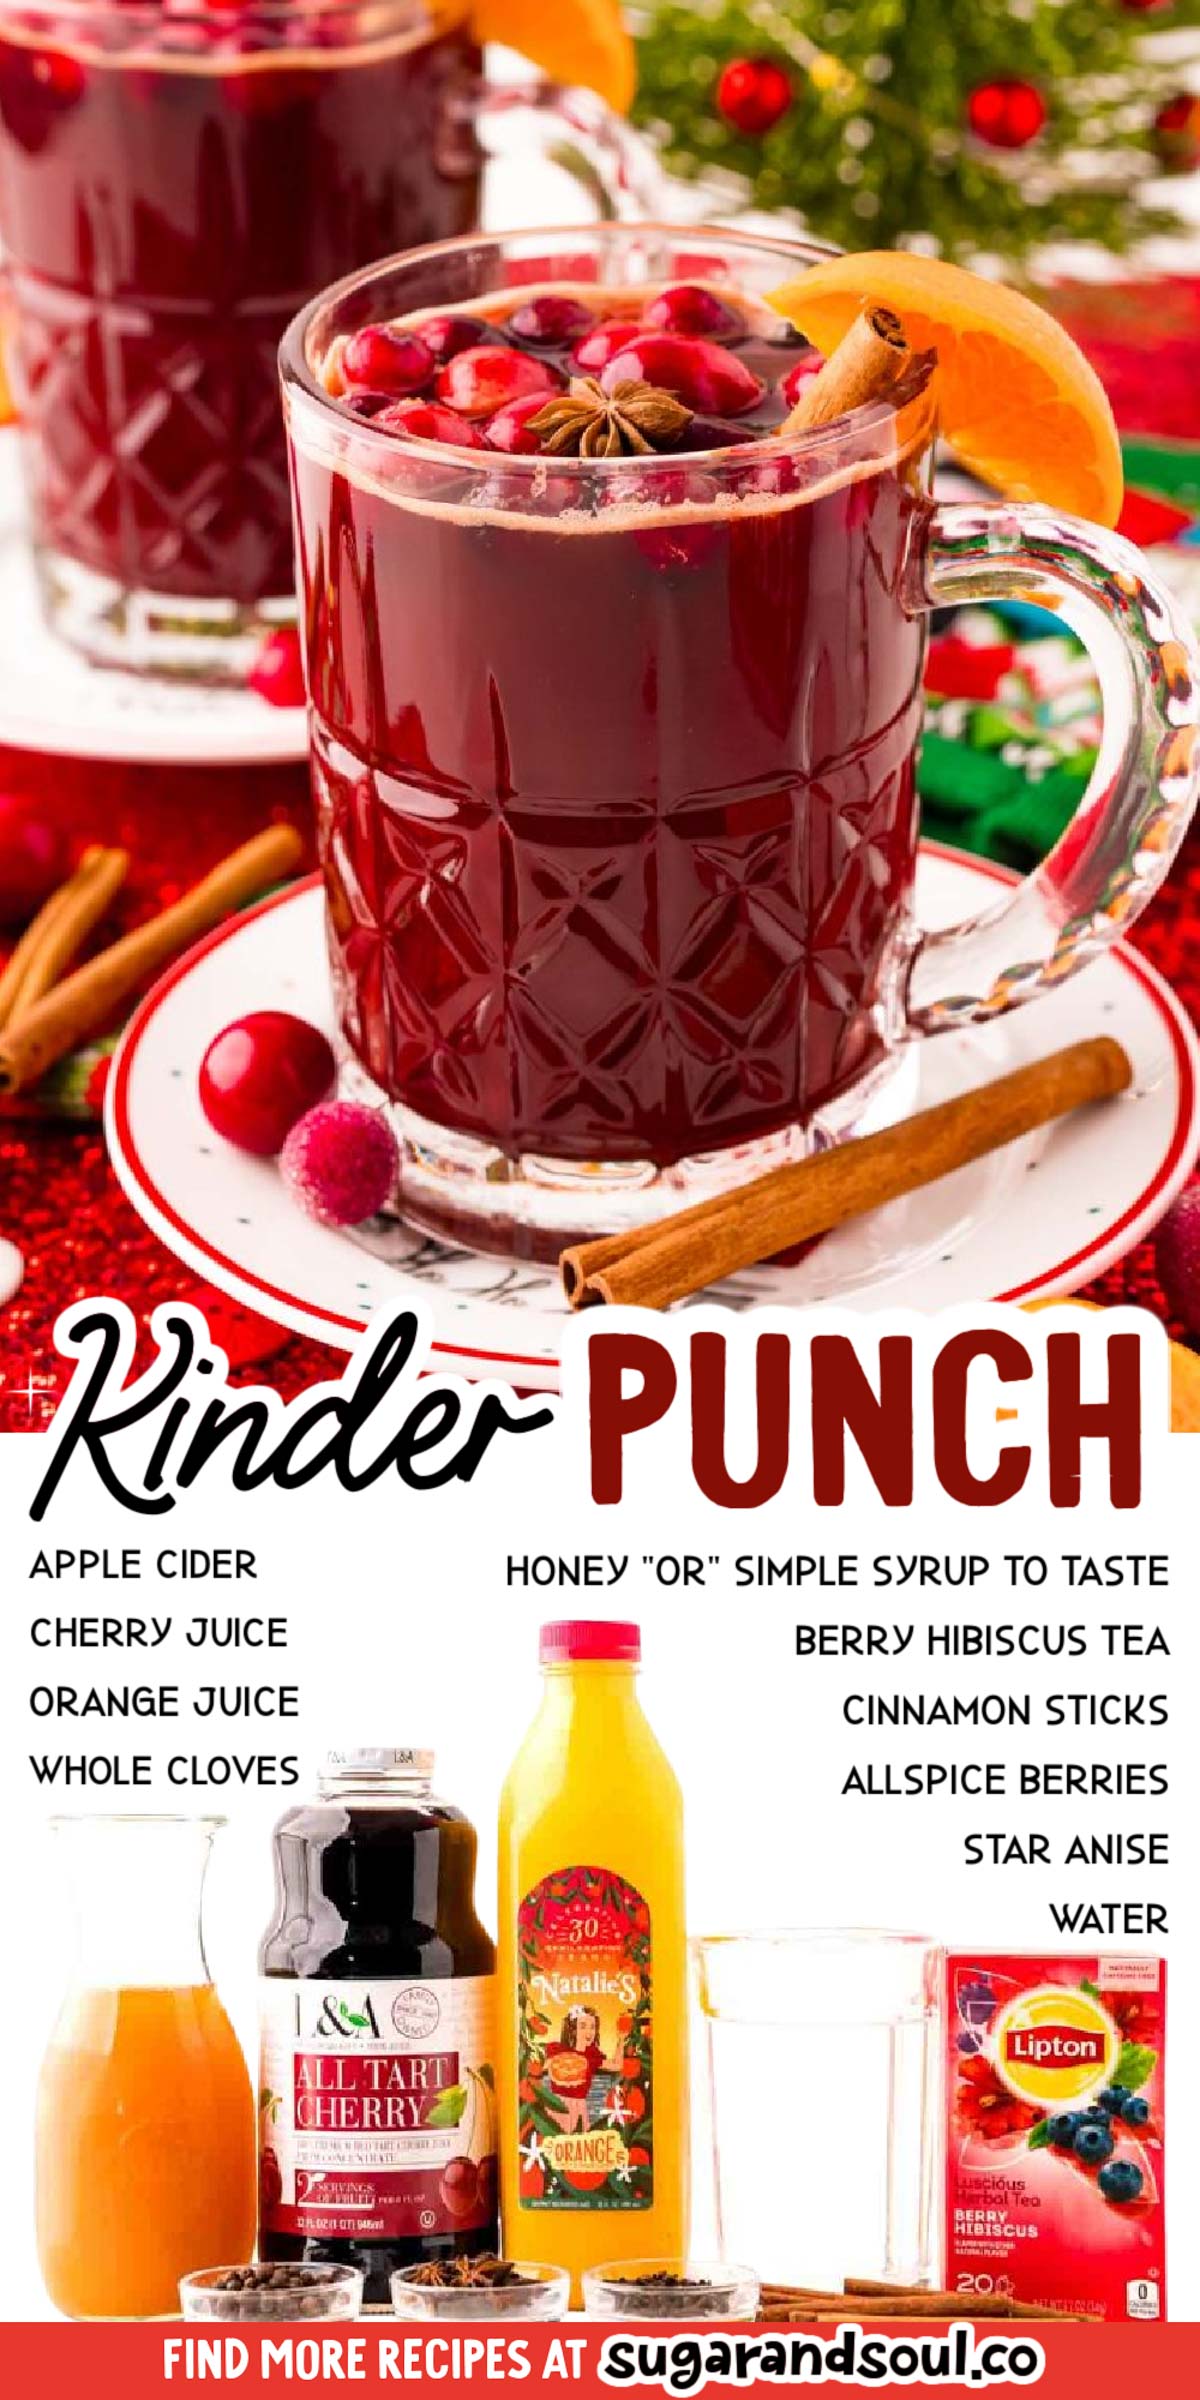 Kinderpunsch is made with mulling spices and hibiscus tea bags in a combination of fruit juices, apple cider, and water for a warm spiced punch! Prep this family-friendly beverage in just 5 minutes! via @sugarandsoulco